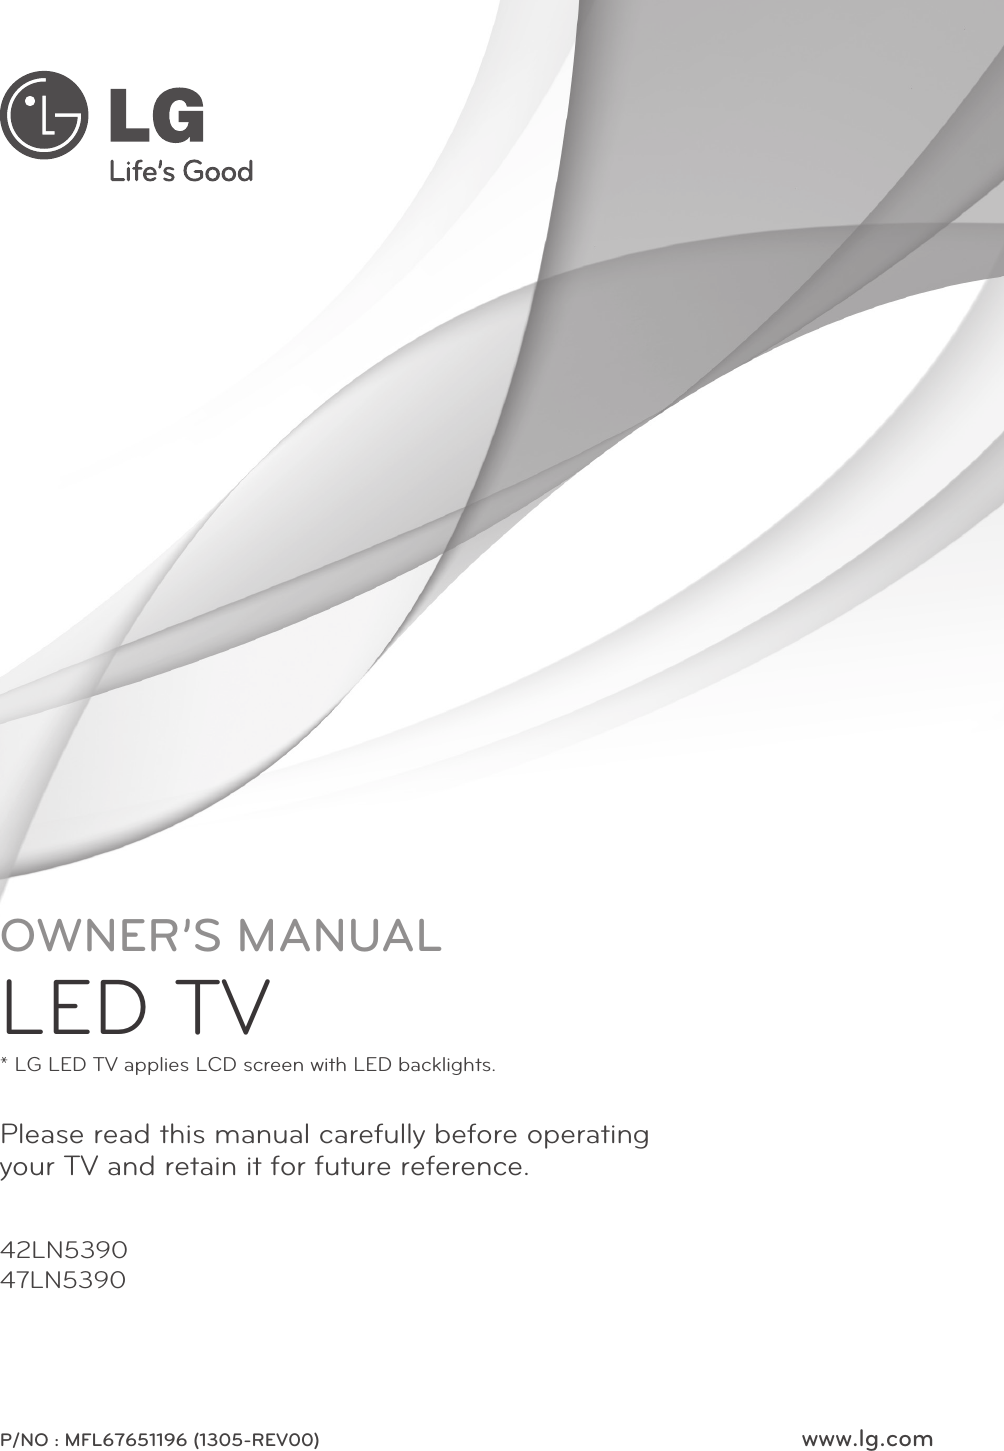 www.lg.comP/NO : MFL67651196 (1305-REV00)42LN5390 47LN5390Please read this manual carefully before operating your TV and retain it for future reference.OWNER’S MANUALLED TV* LG LED TV applies LCD screen with LED backlights.